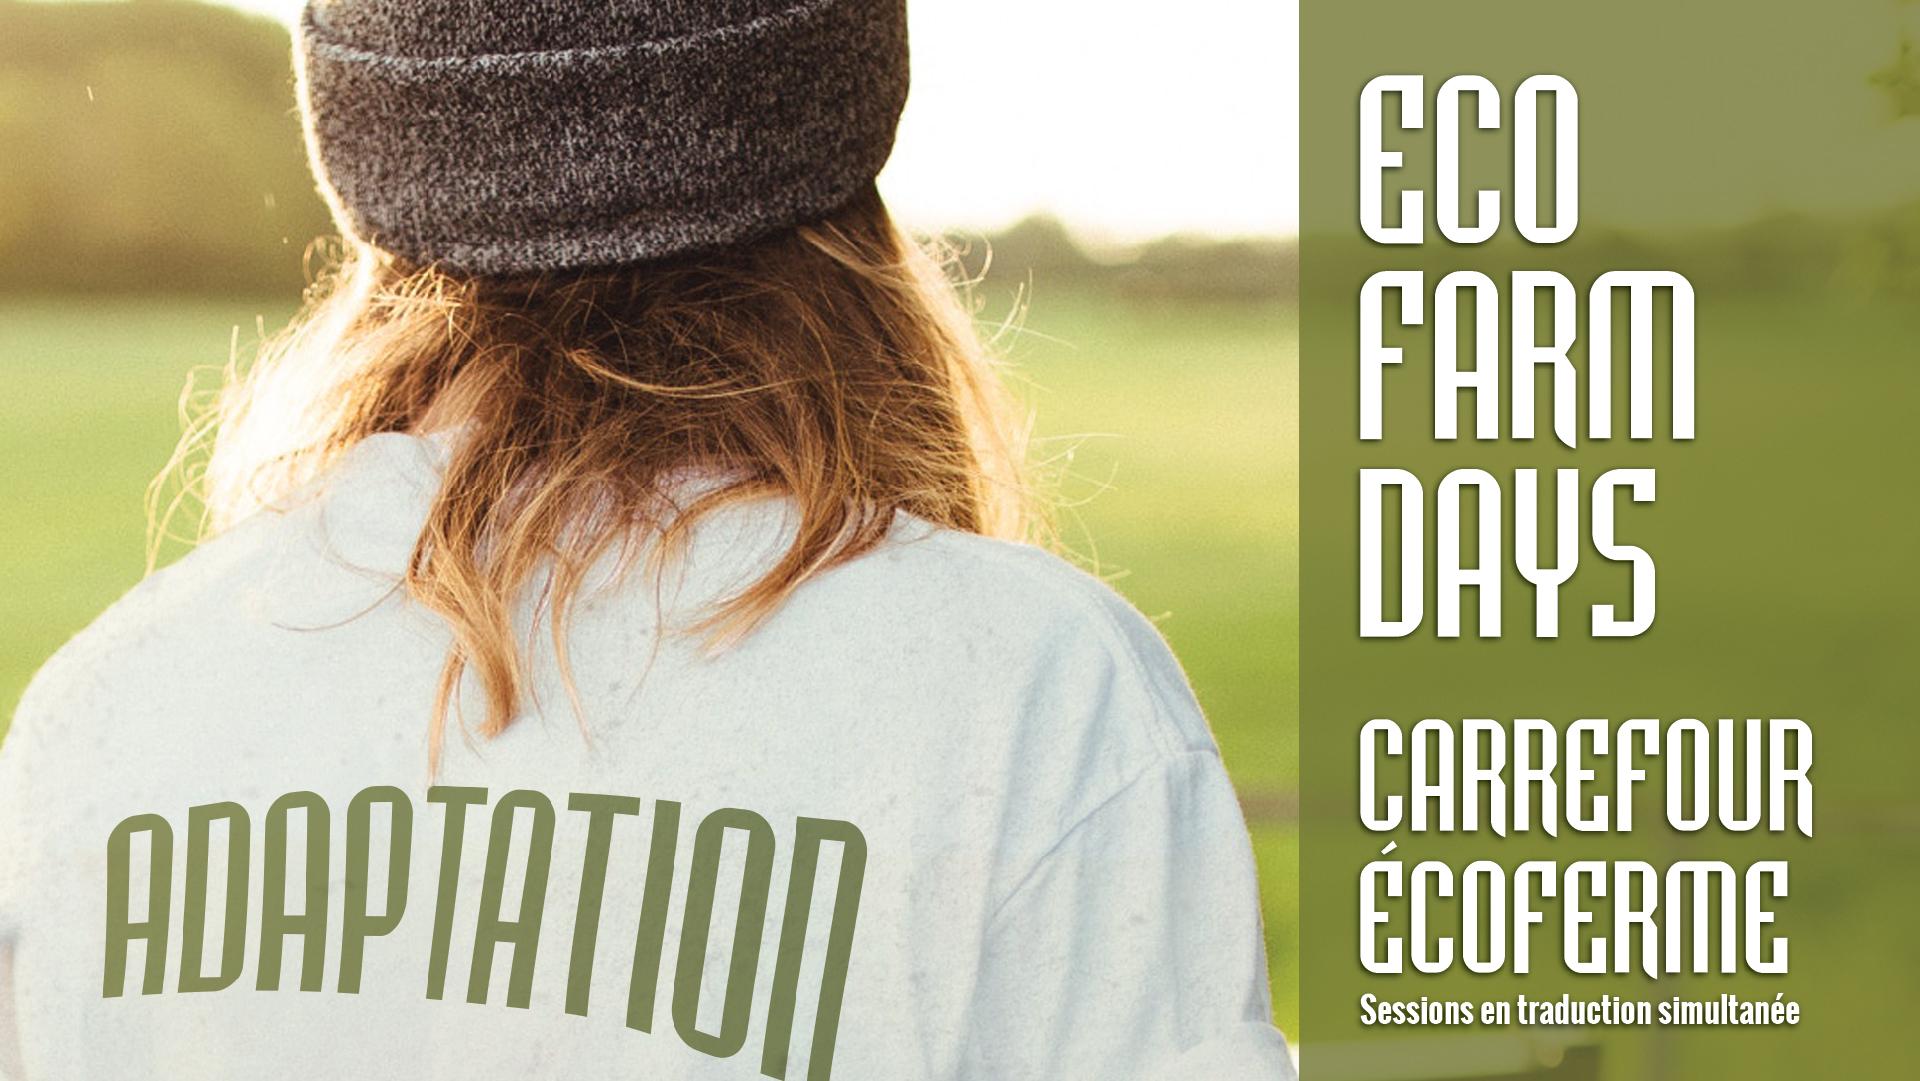 Eco Farm Days 2018 theme “Adaptation” tries to address the fast-changing world of organic agriculture